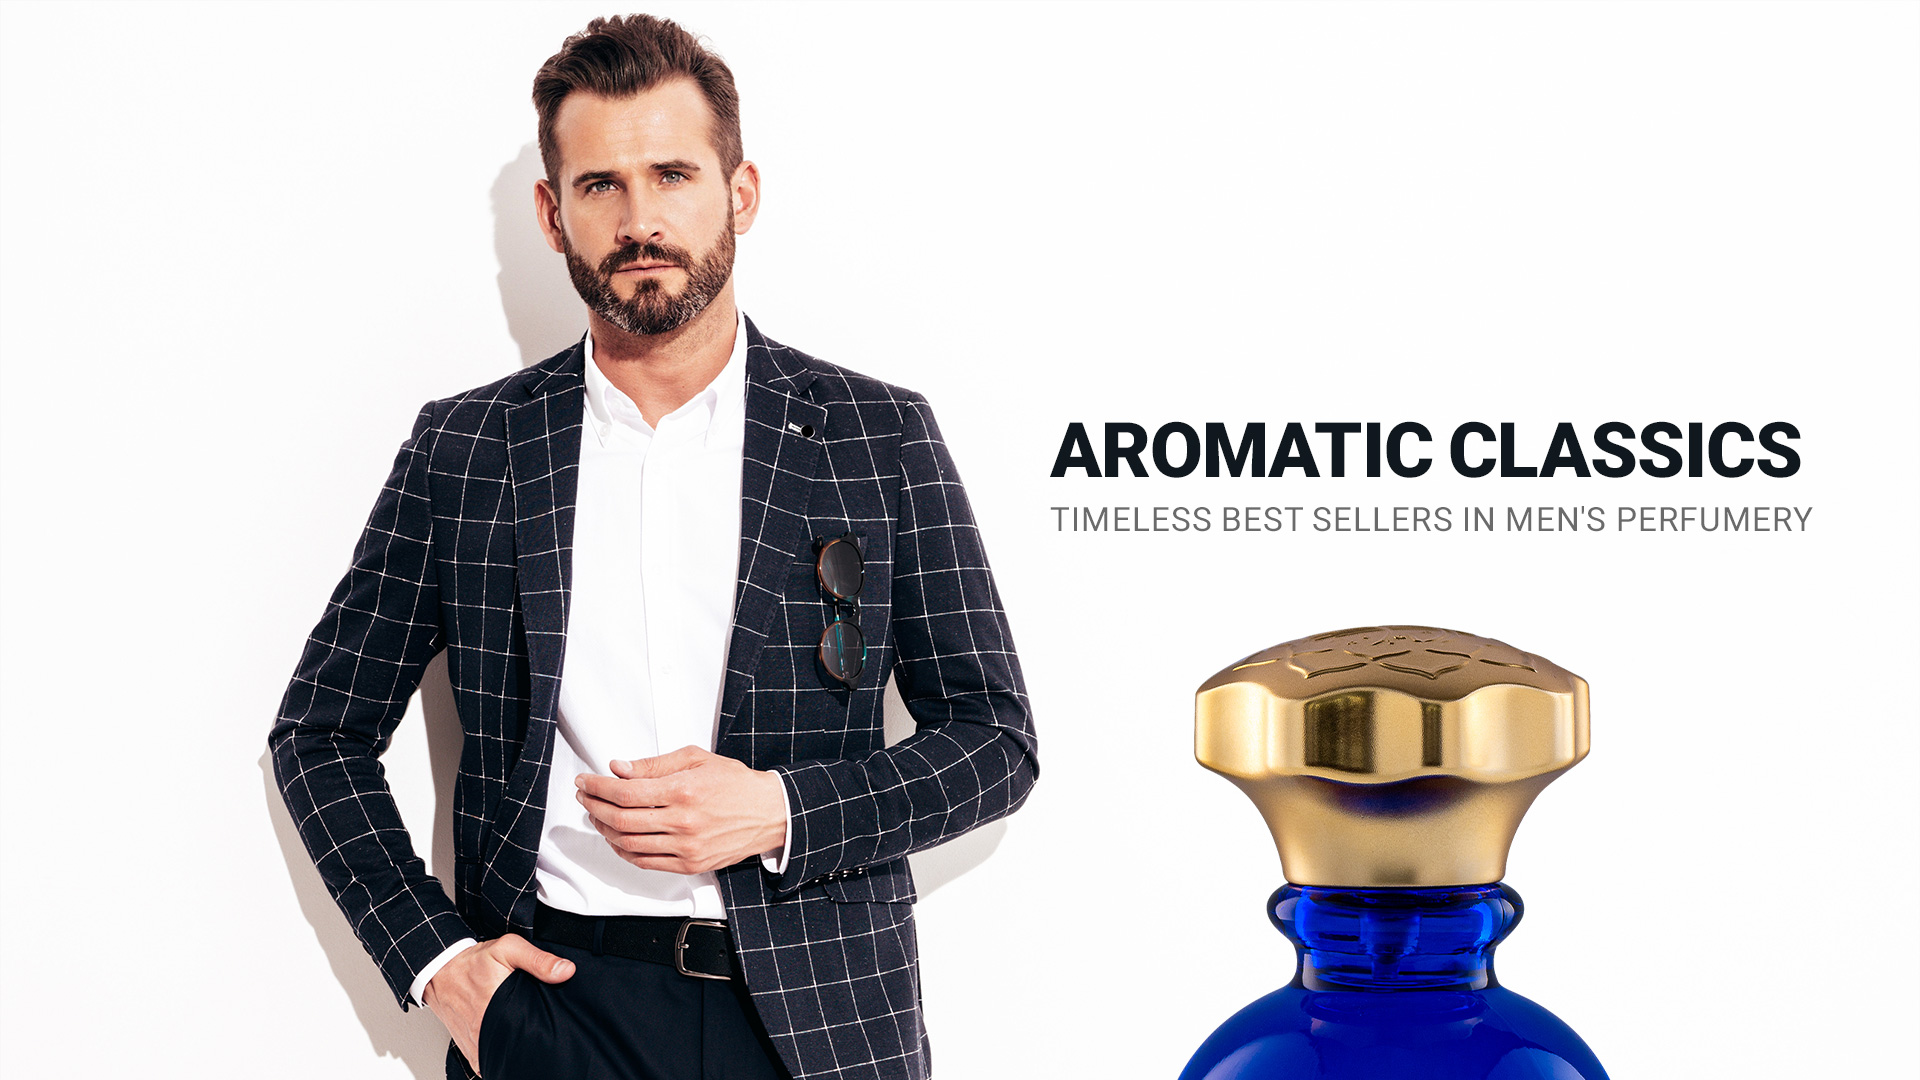 Aromatic Classics: Timeless Best Sellers in Men's Perfumery ​